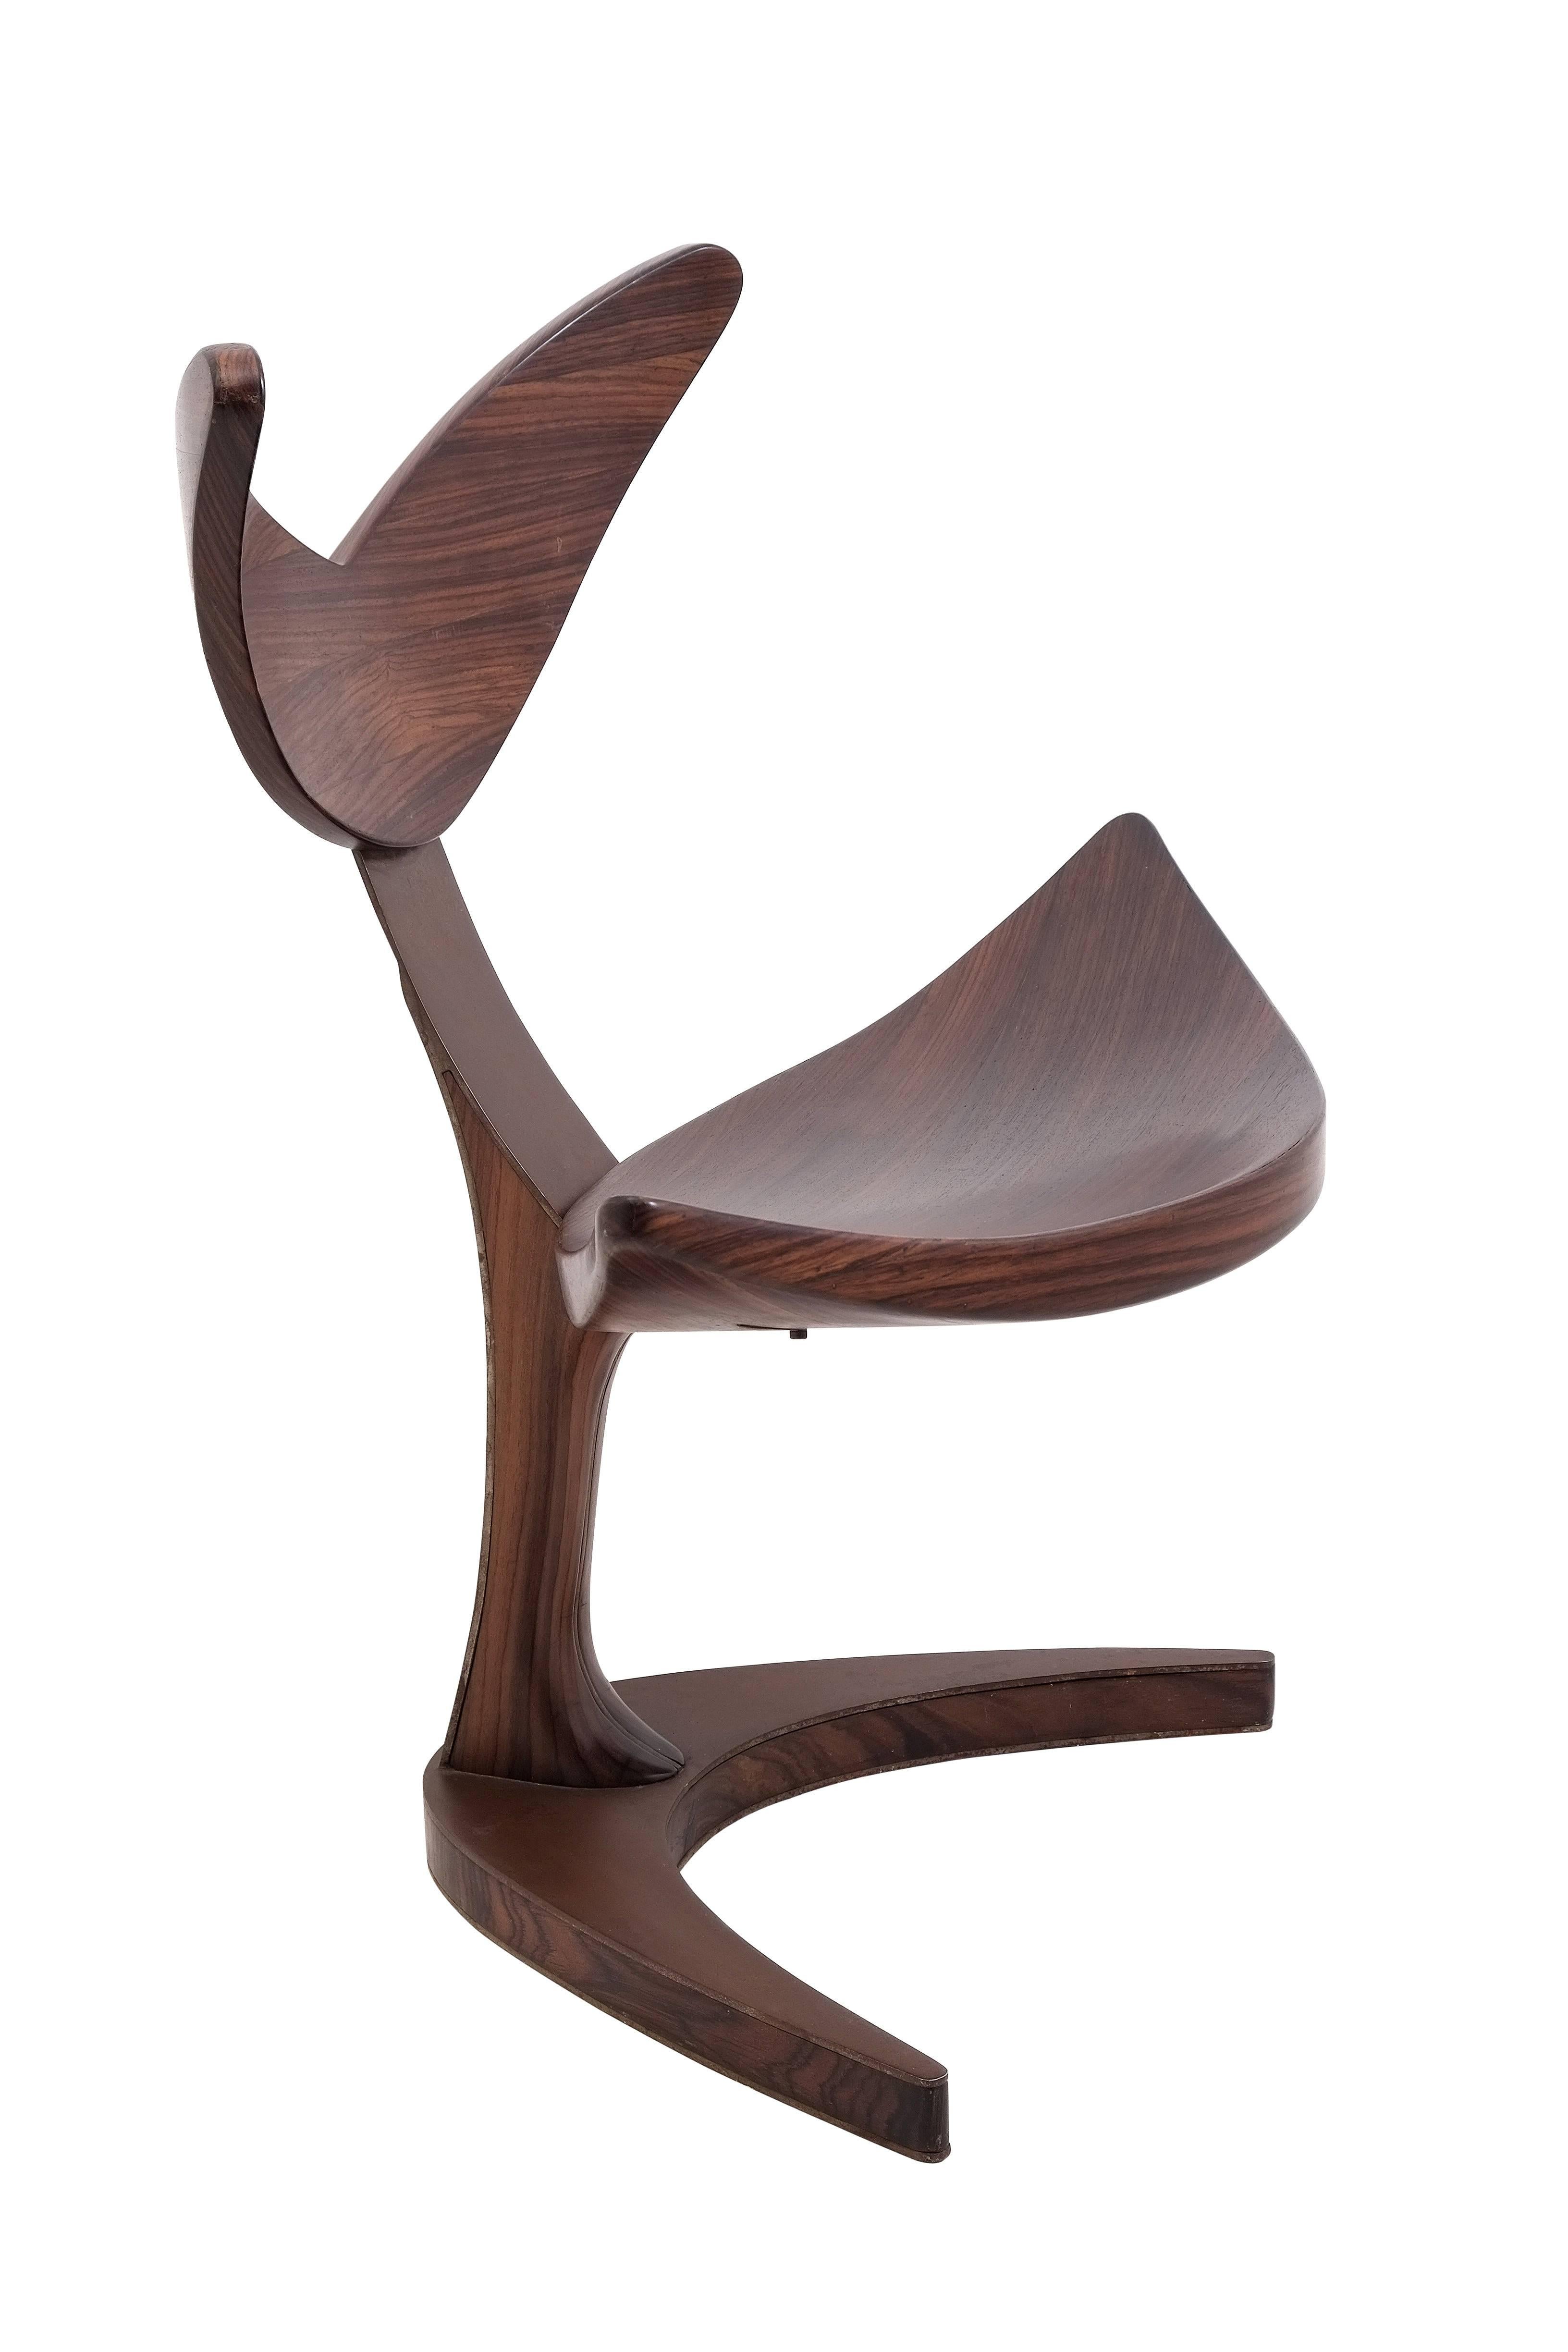 If you rest, you rust.

Unique chair inspired by whale tail made of plywood layered with 5 mm rosewood veneer, the rusty effect on steel legs and support create a vintage look, whereas its slim and elegant design make it fits into modern themed